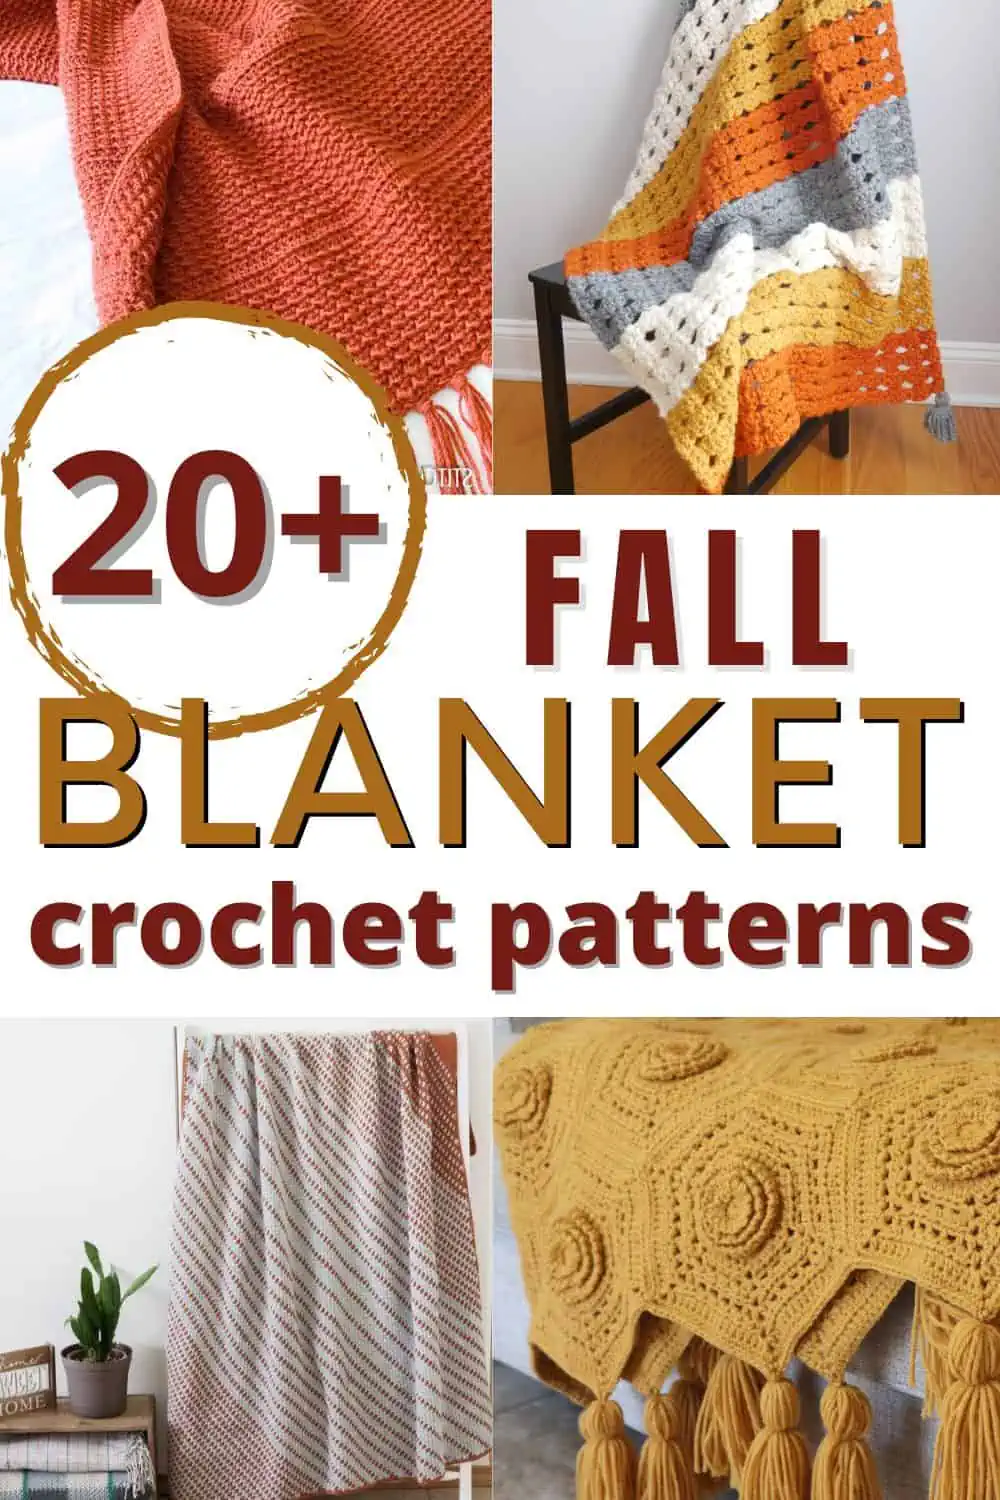 collage image of different autumn crochet blankets with text overlay reading "20+ fall blanket crochet patterns"